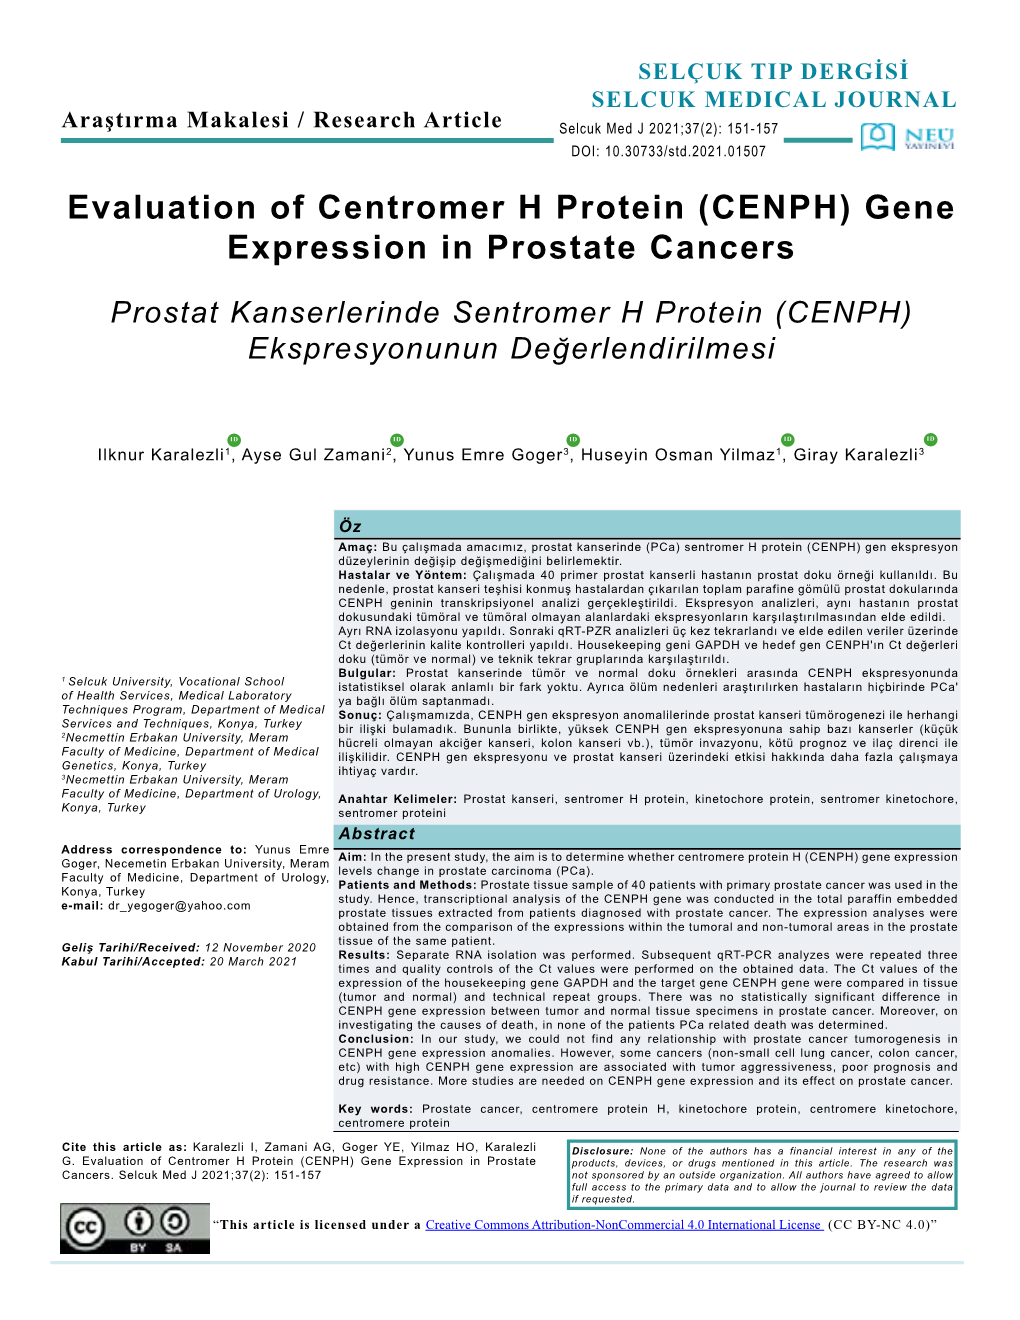 (CENPH) Gene Expression in Prostate Cancers